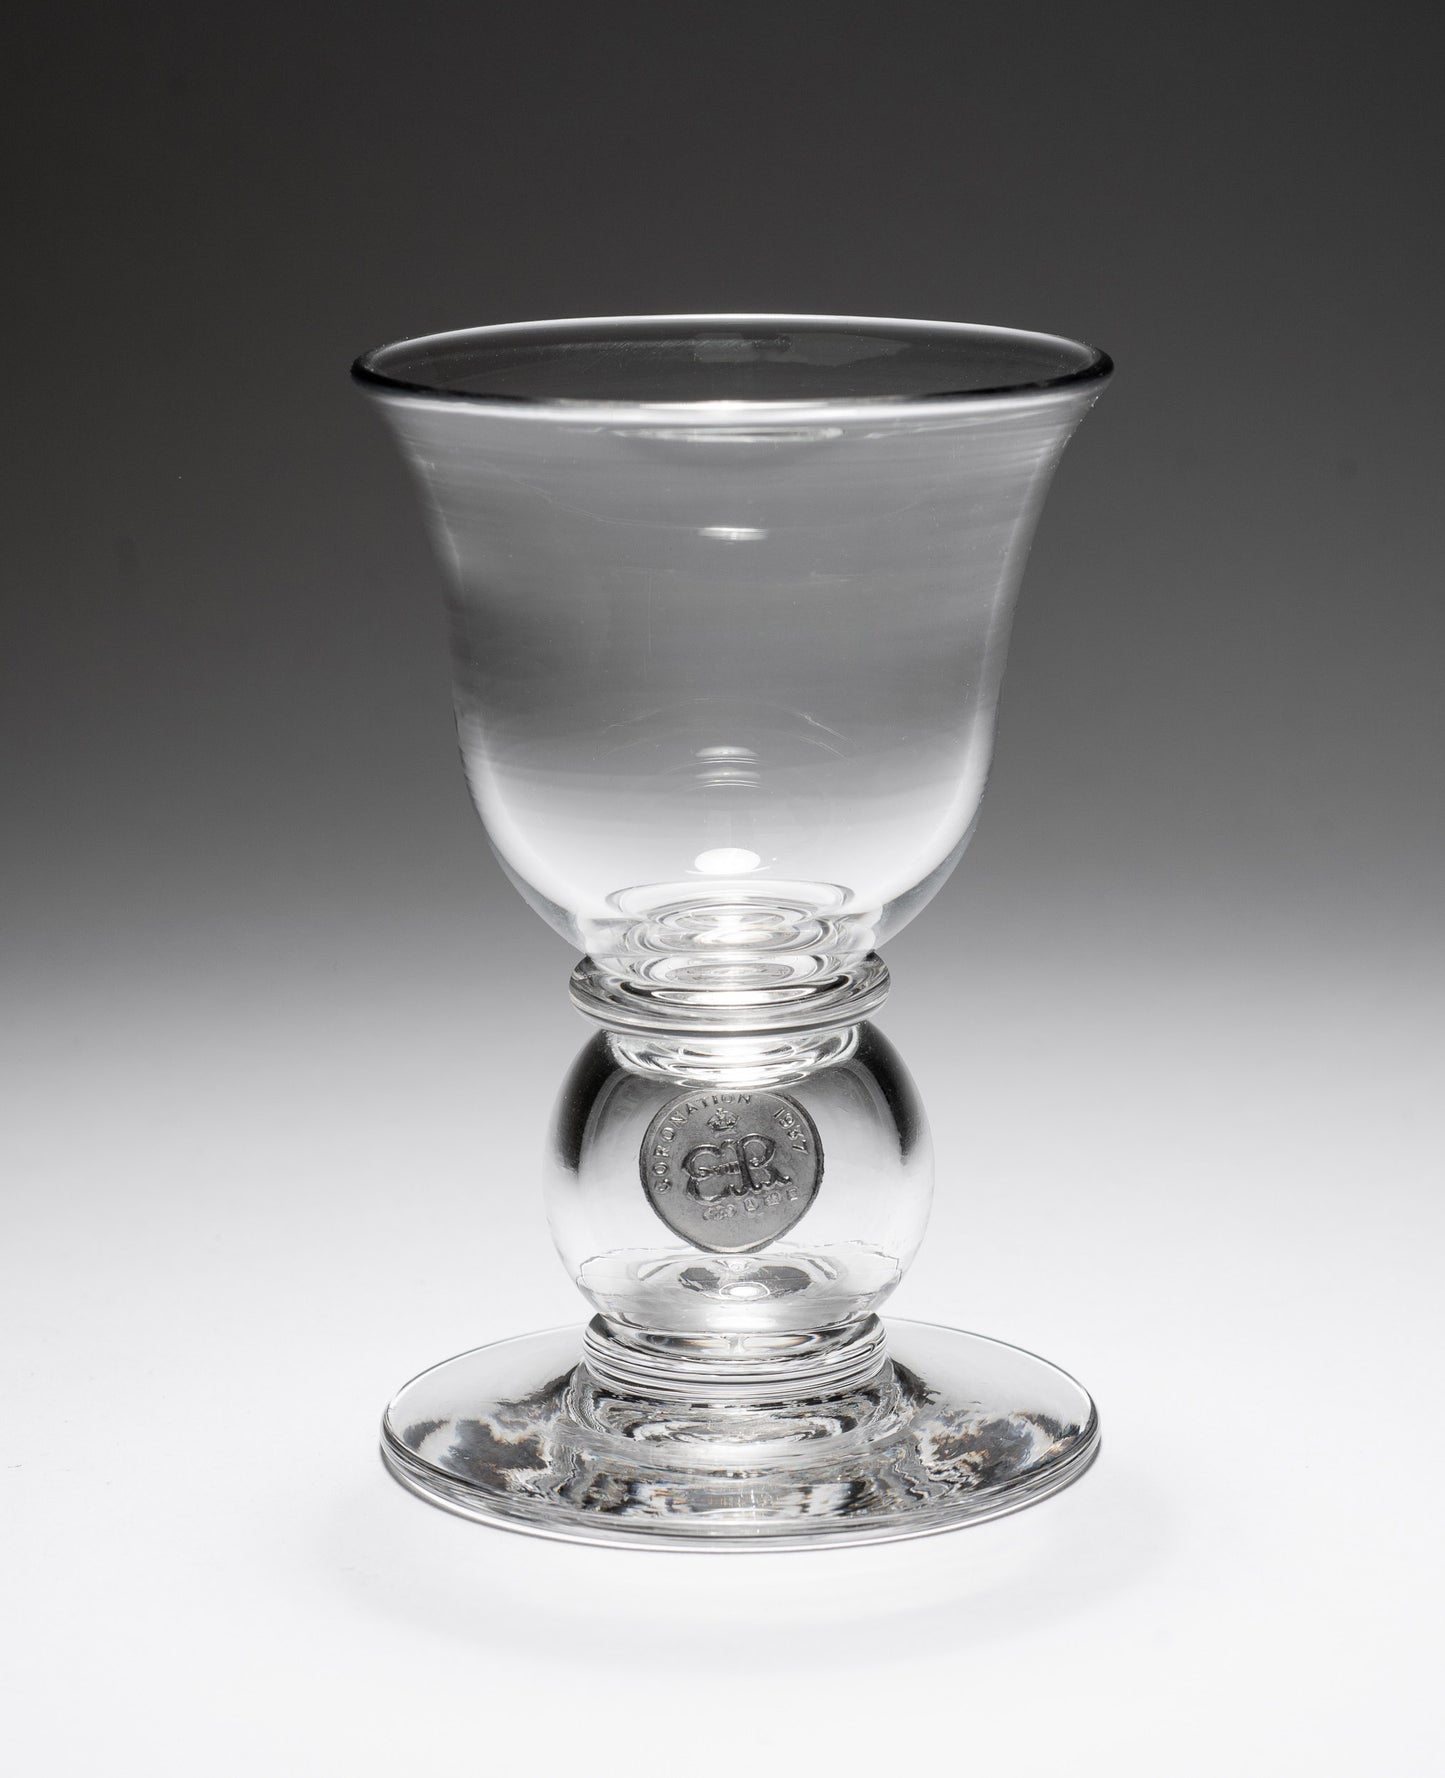 Edward VIII Coronation Drinking Glass with Silver Coin for Plummer Ltd NYC (Code 2240)